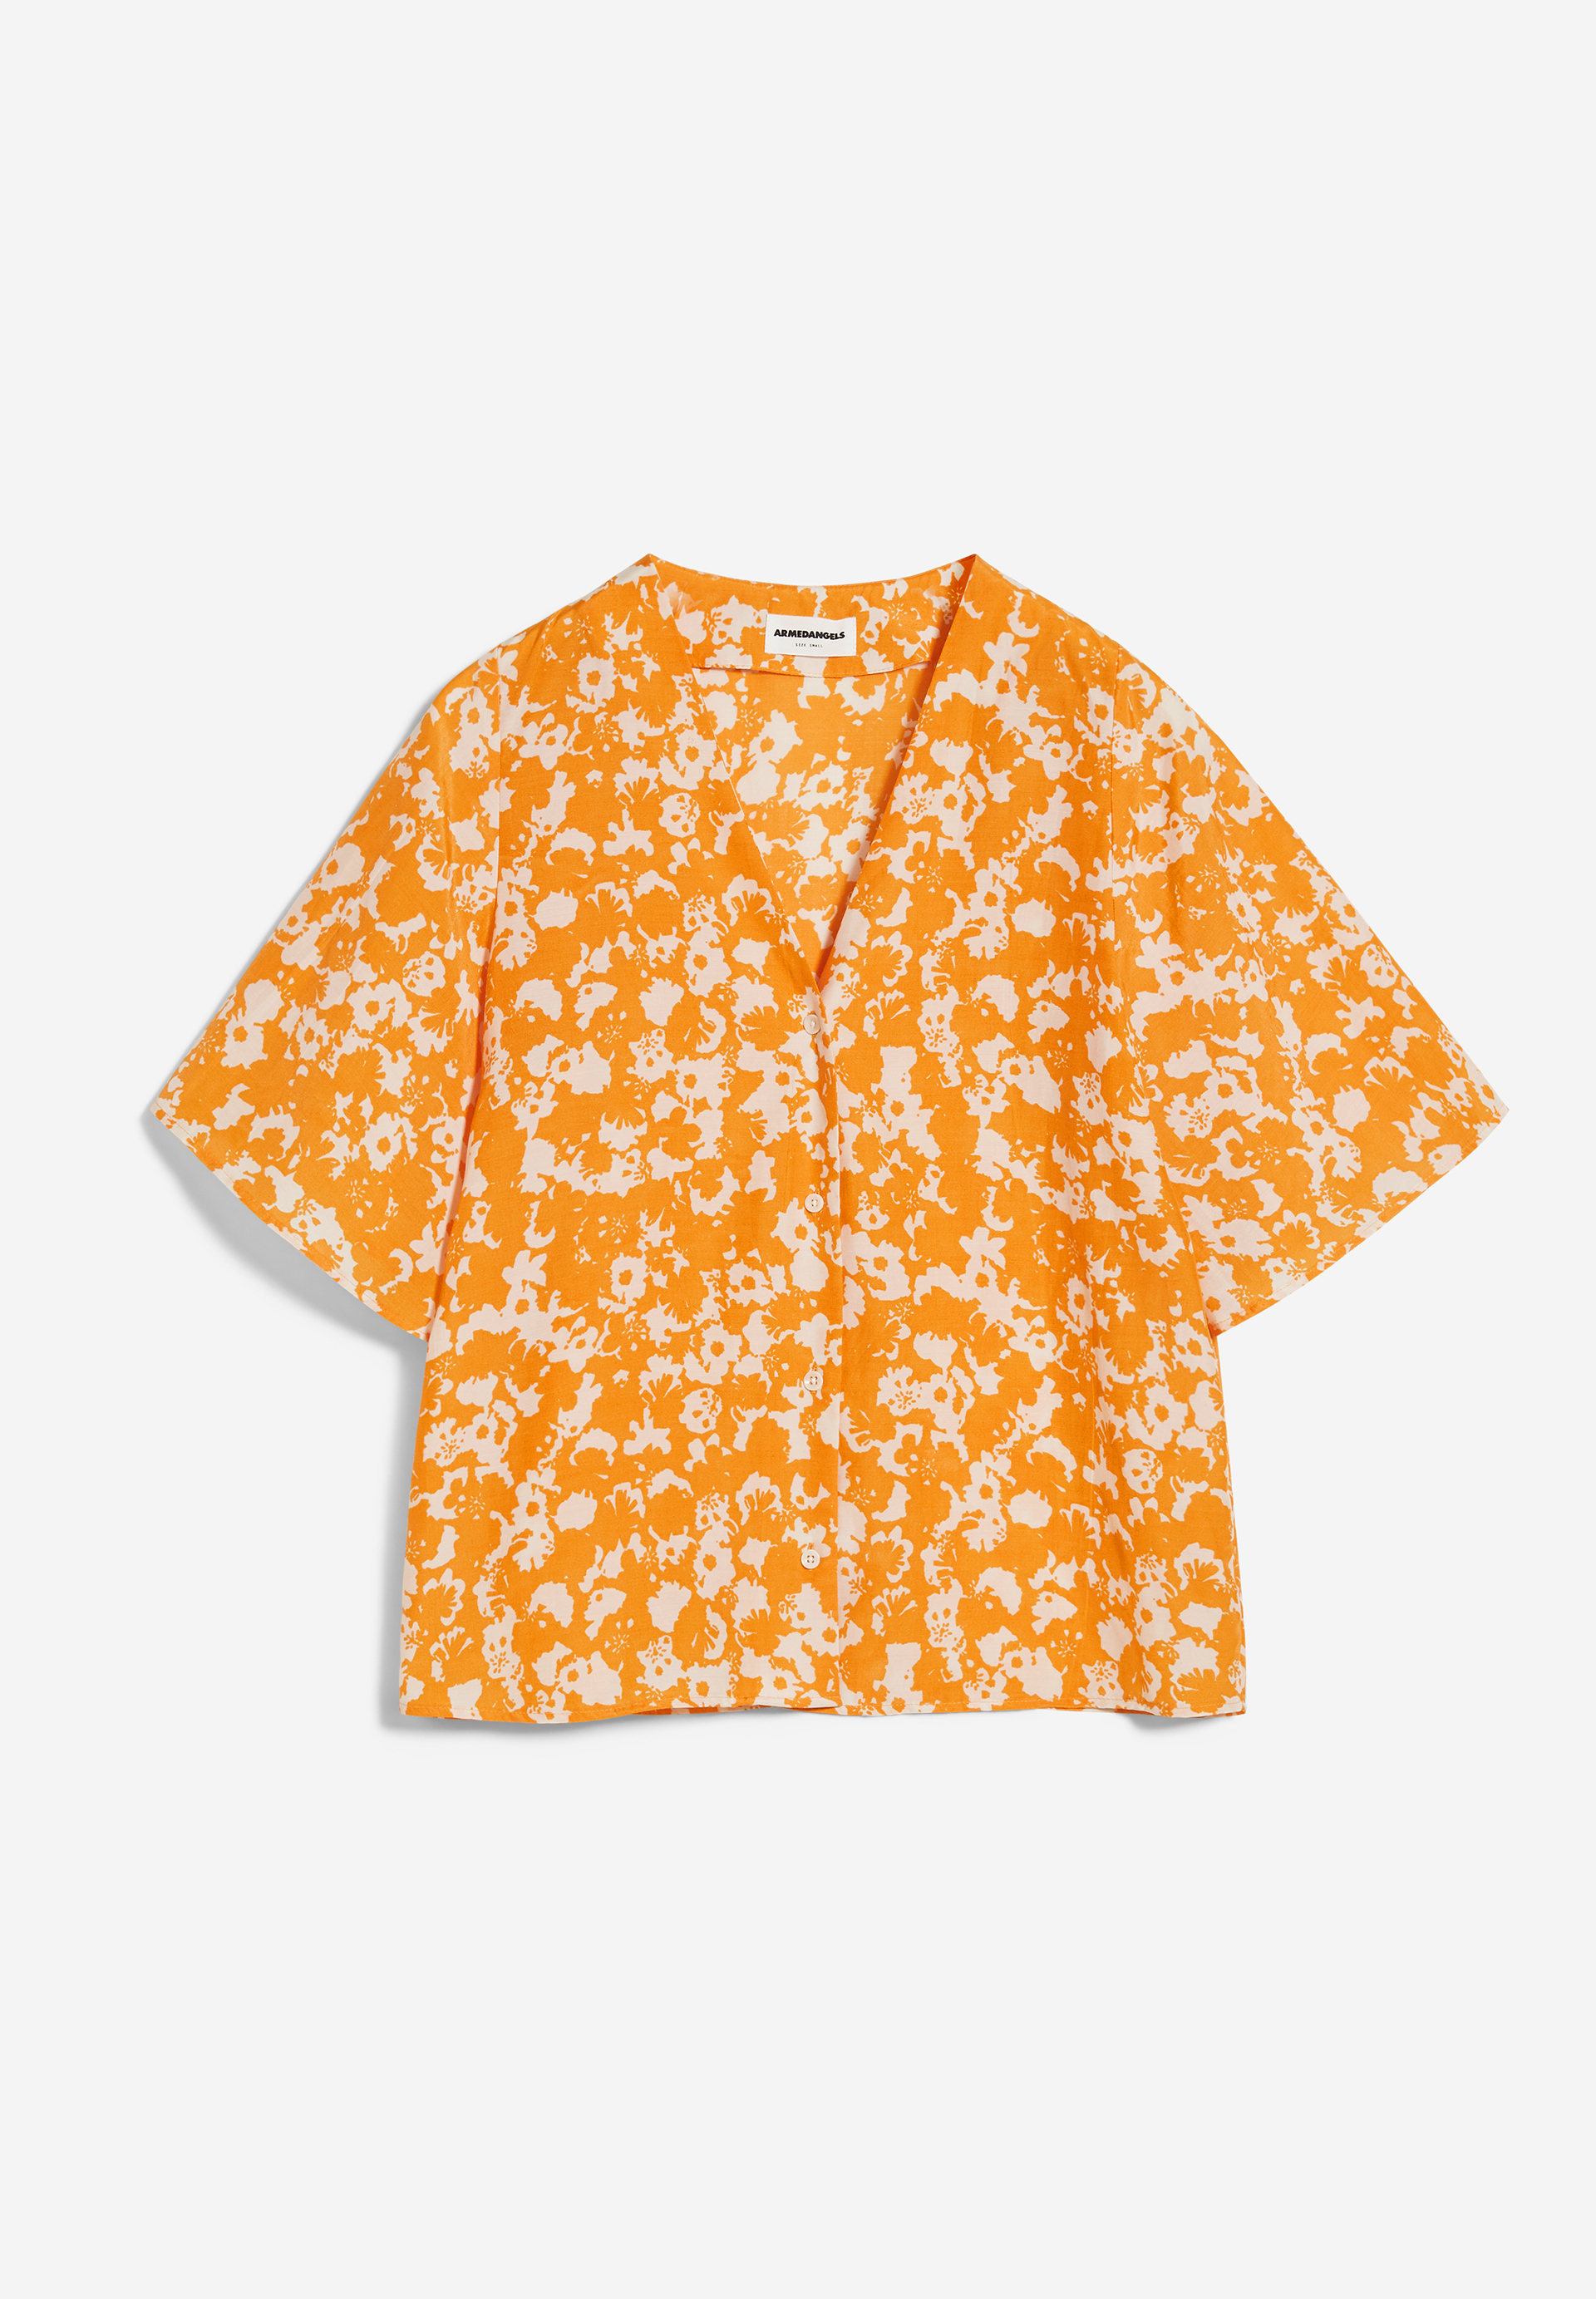 HOLMAA MANGORANGE Blouse Relaxed Fit made of TENCEL™ Lyocell